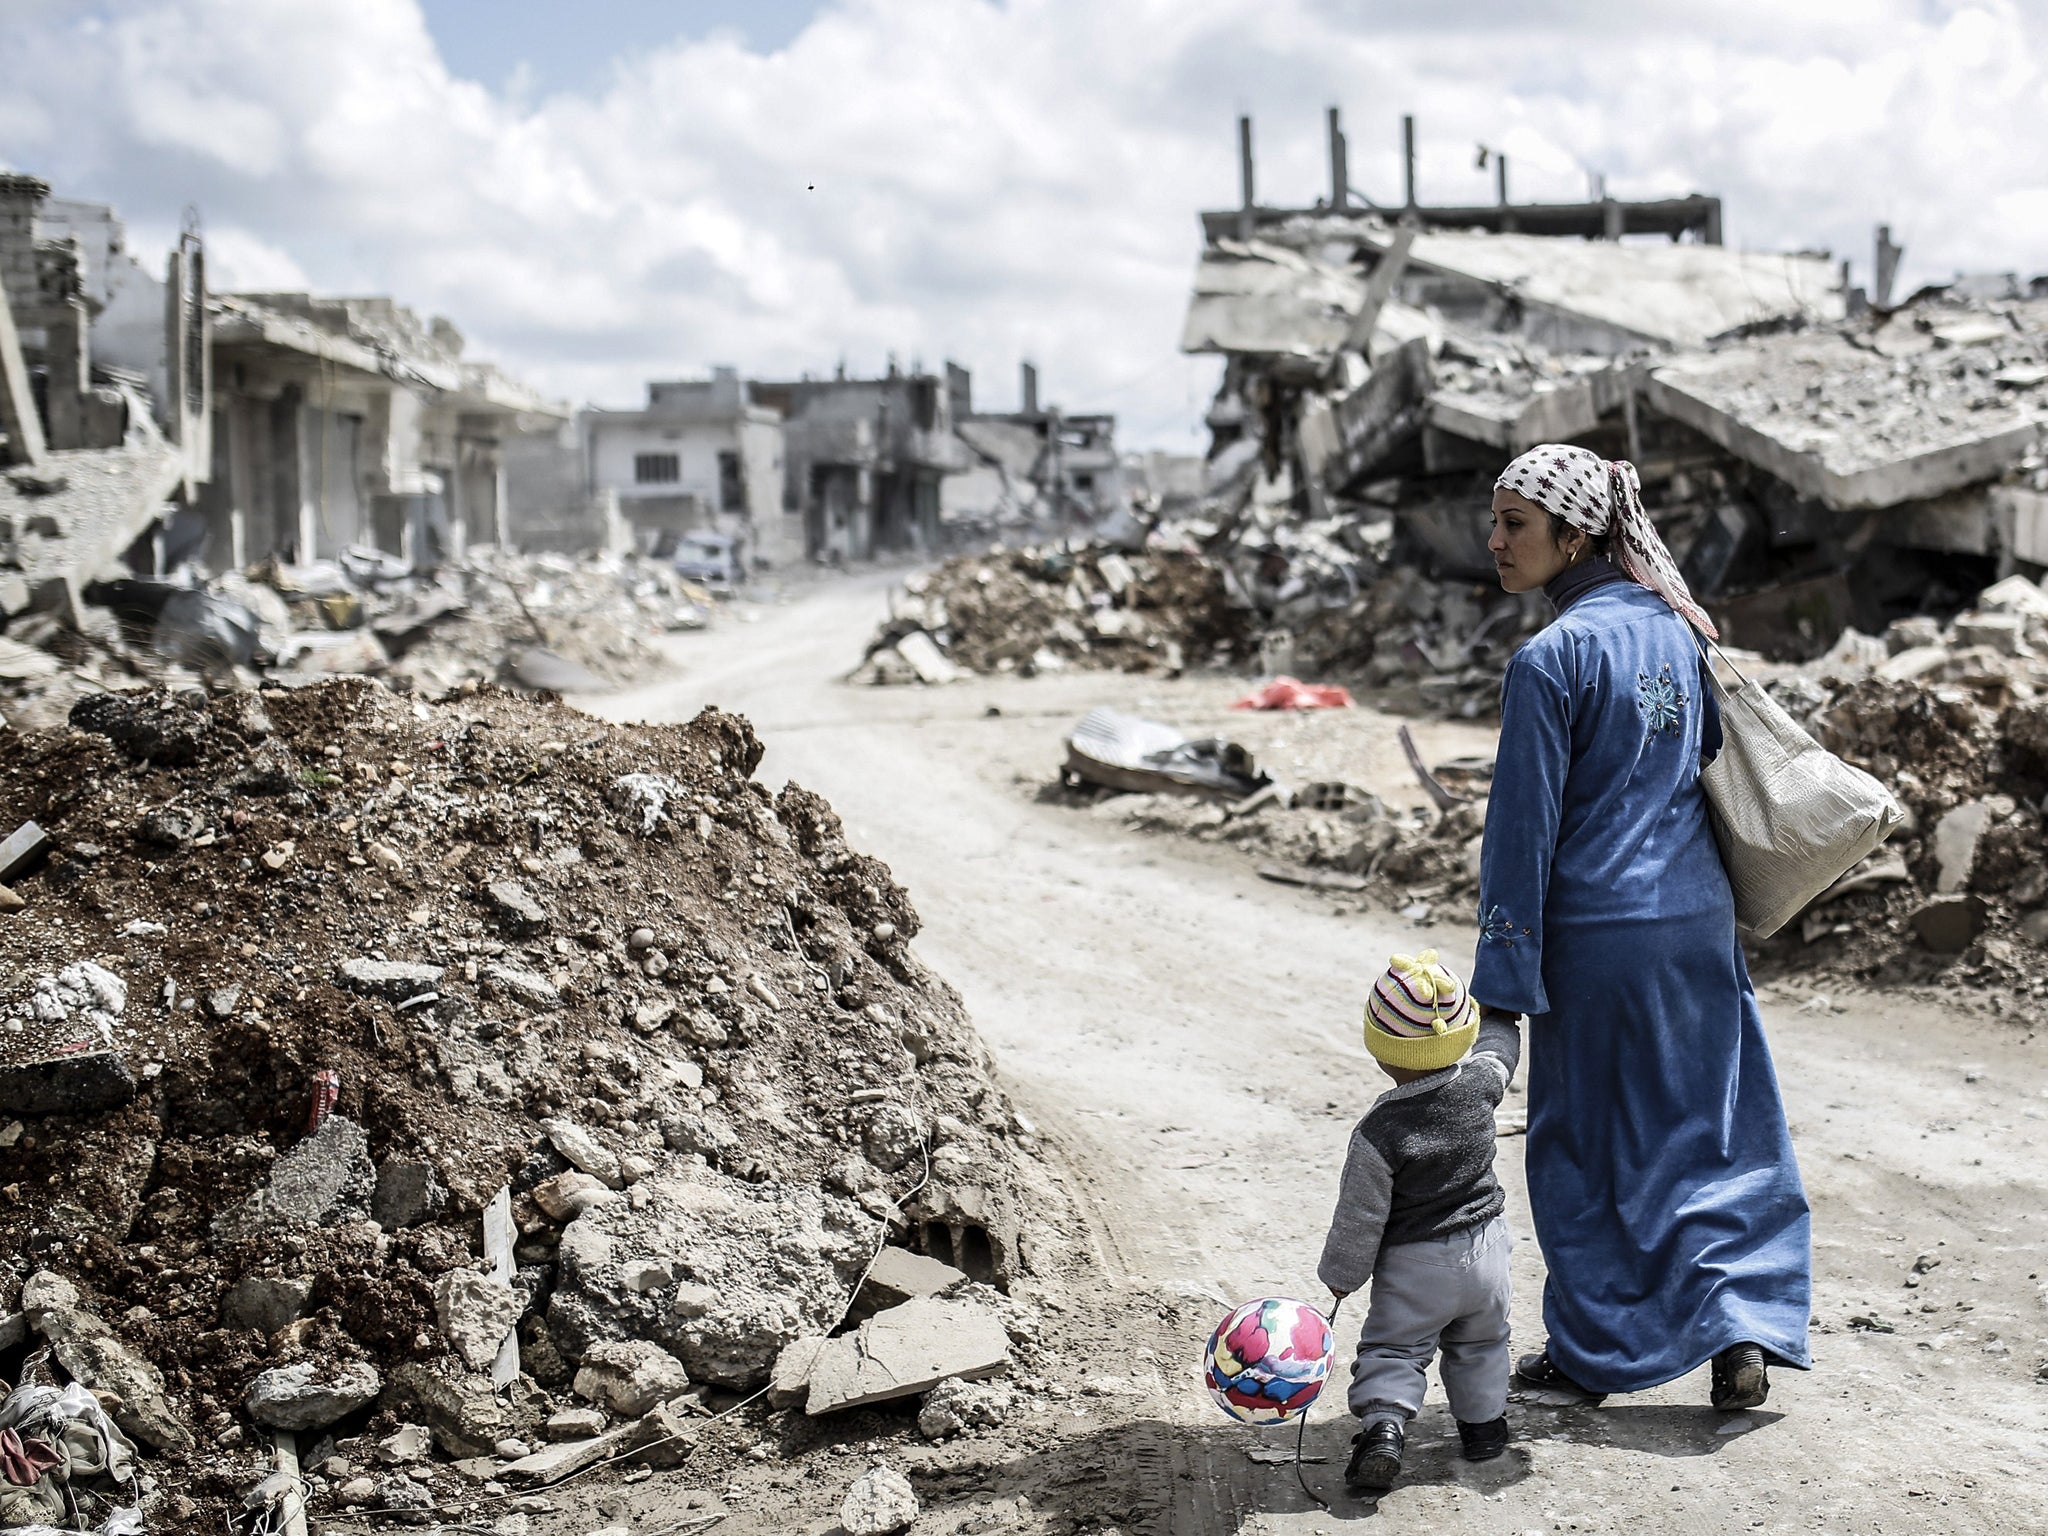 Sadness is the dominant theme for the children as old as the Syrian war